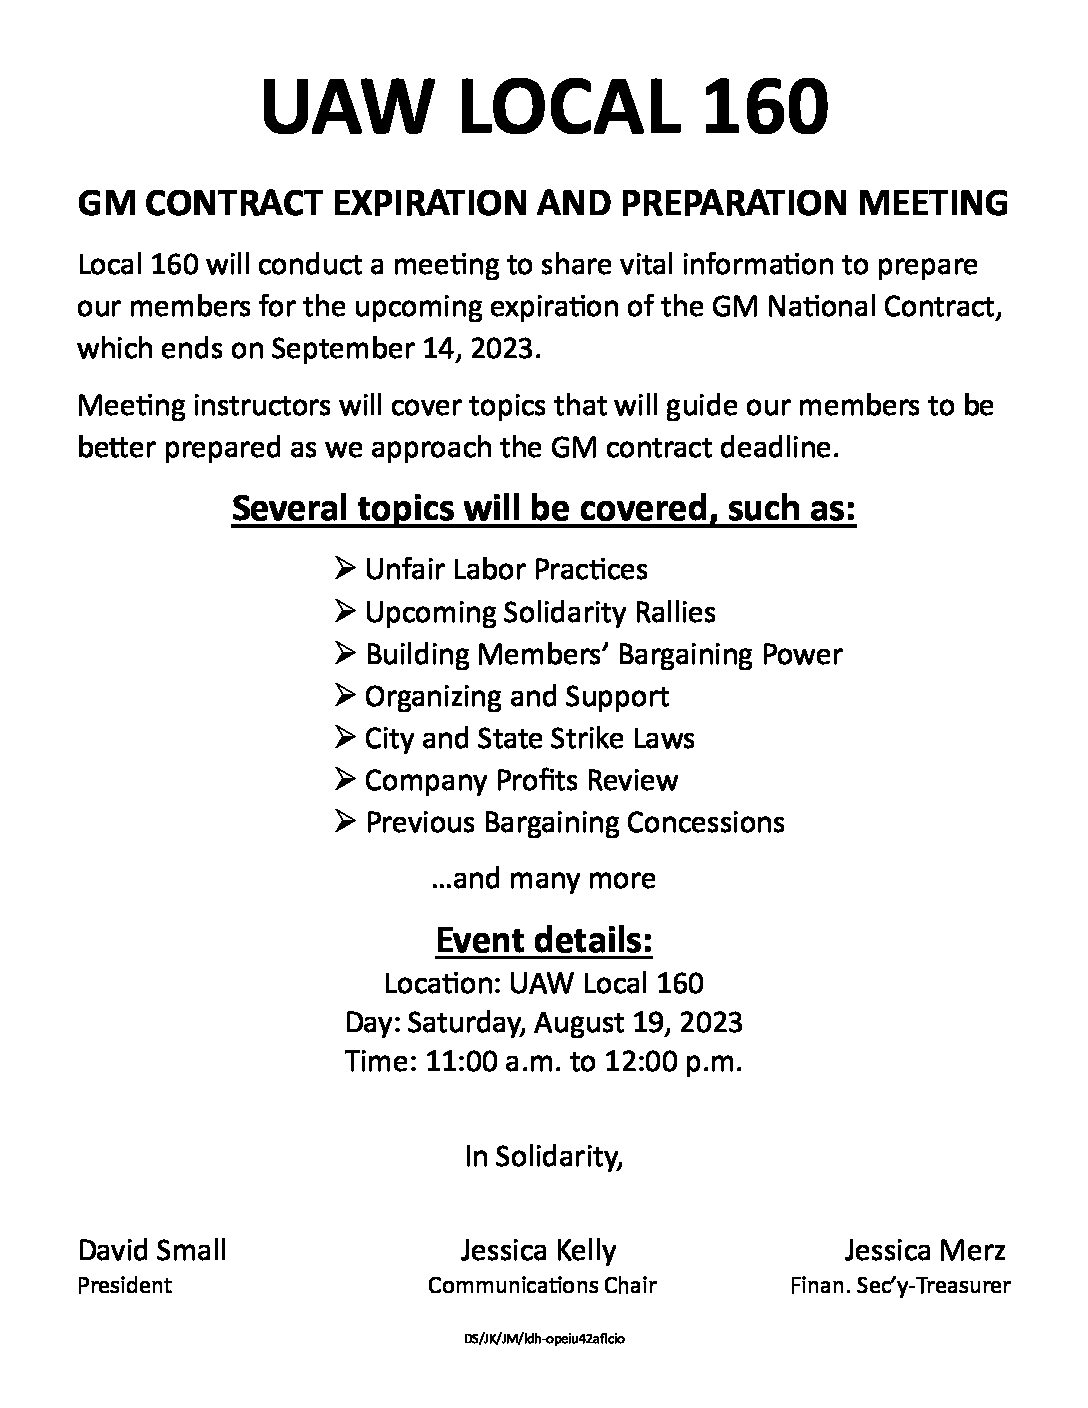 Contract Expiration and Preparation Meeting August 19th UAW Local 160